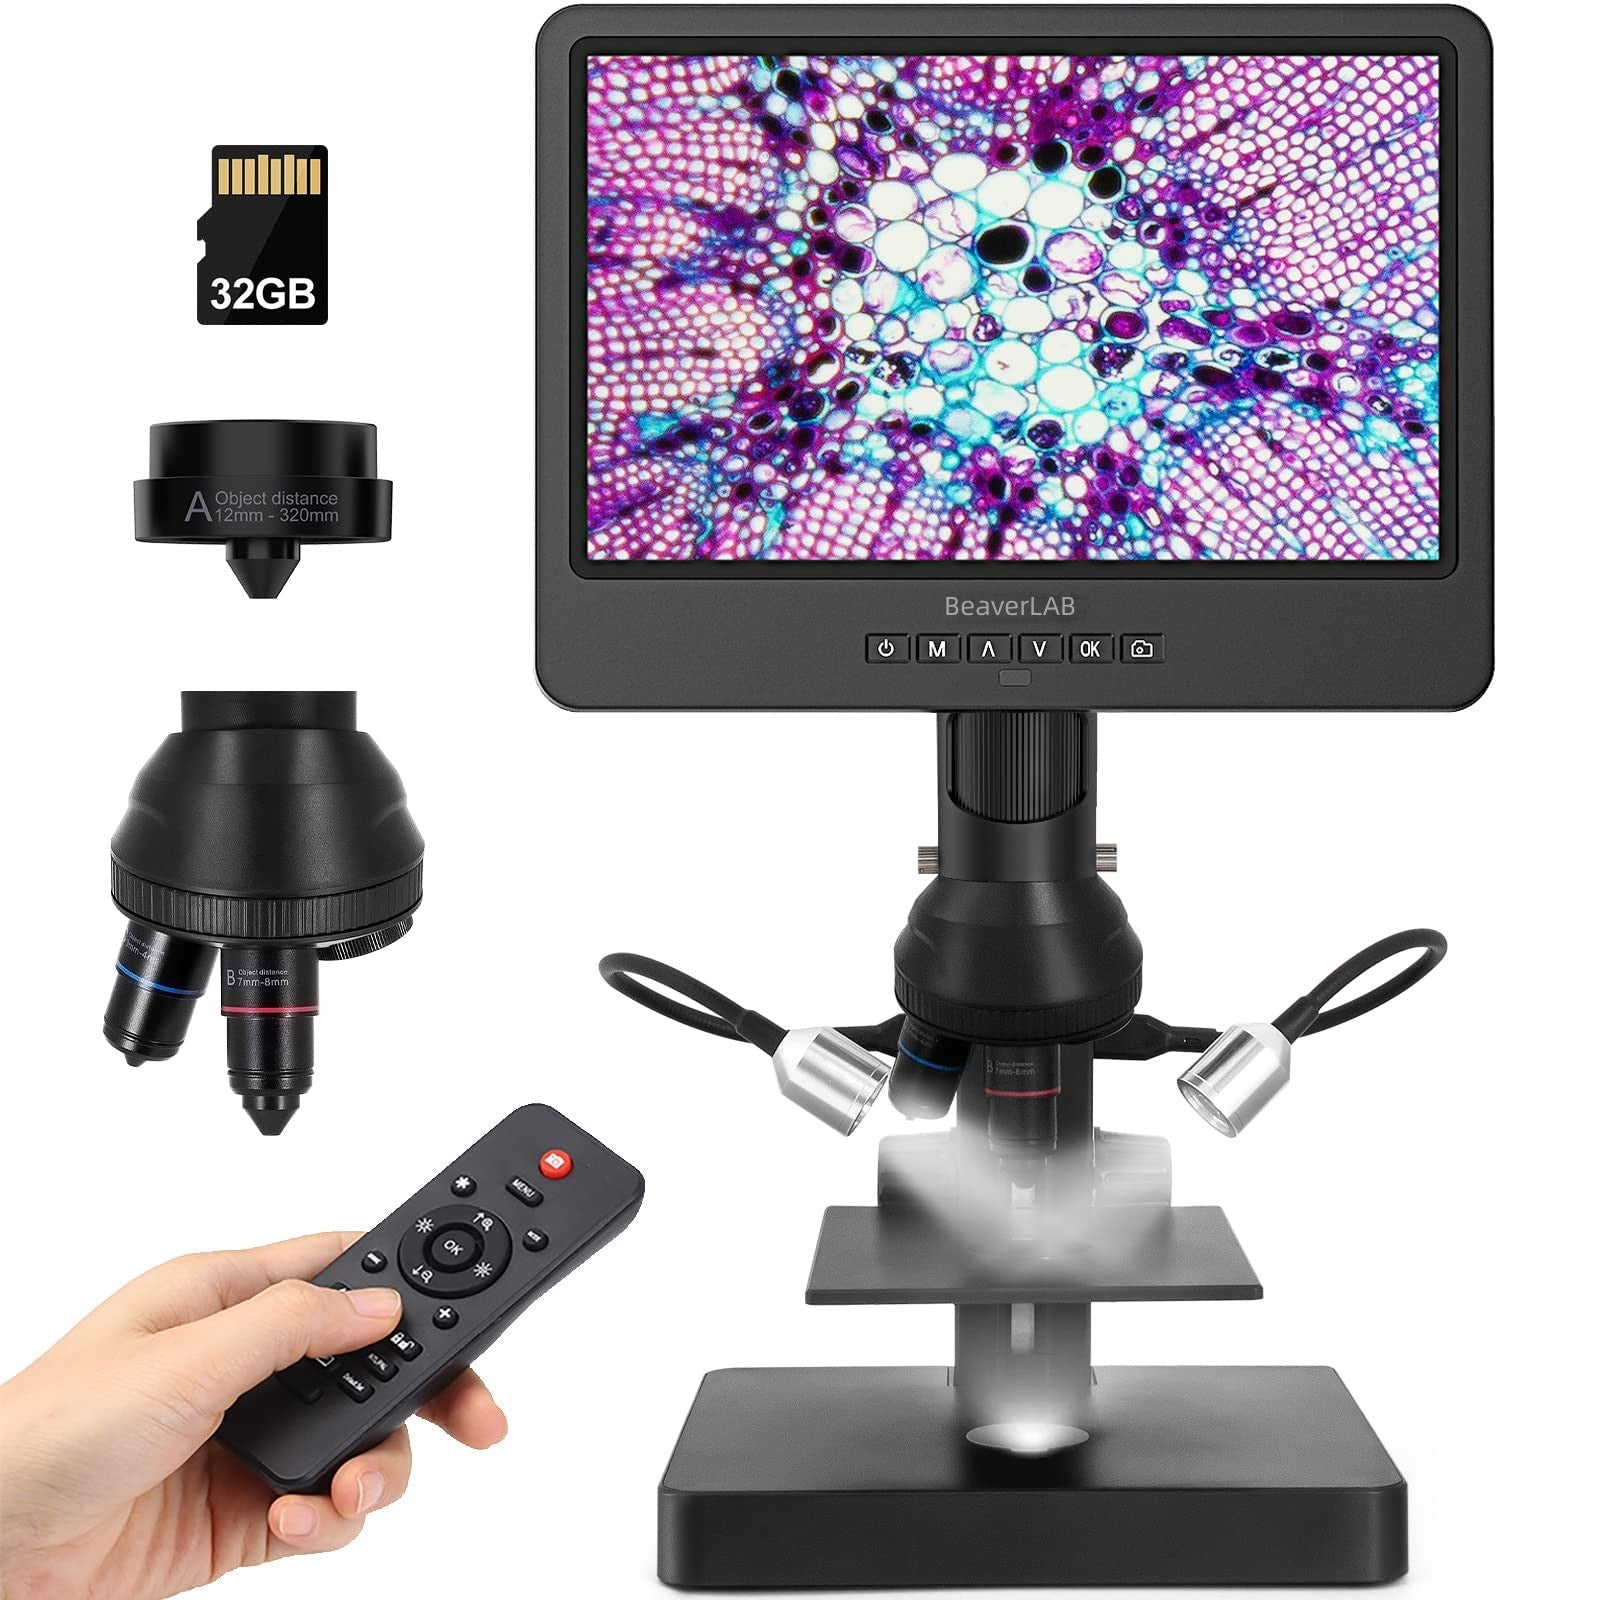 10.1 Inch HDMI Digital Microscope, 4000x 3 Lens 2160P UHD Video Record, Biological Microscope Kit for Adults and Kids, Coin Microscope for Error Coins, Prepred Slides, 32G SD Card